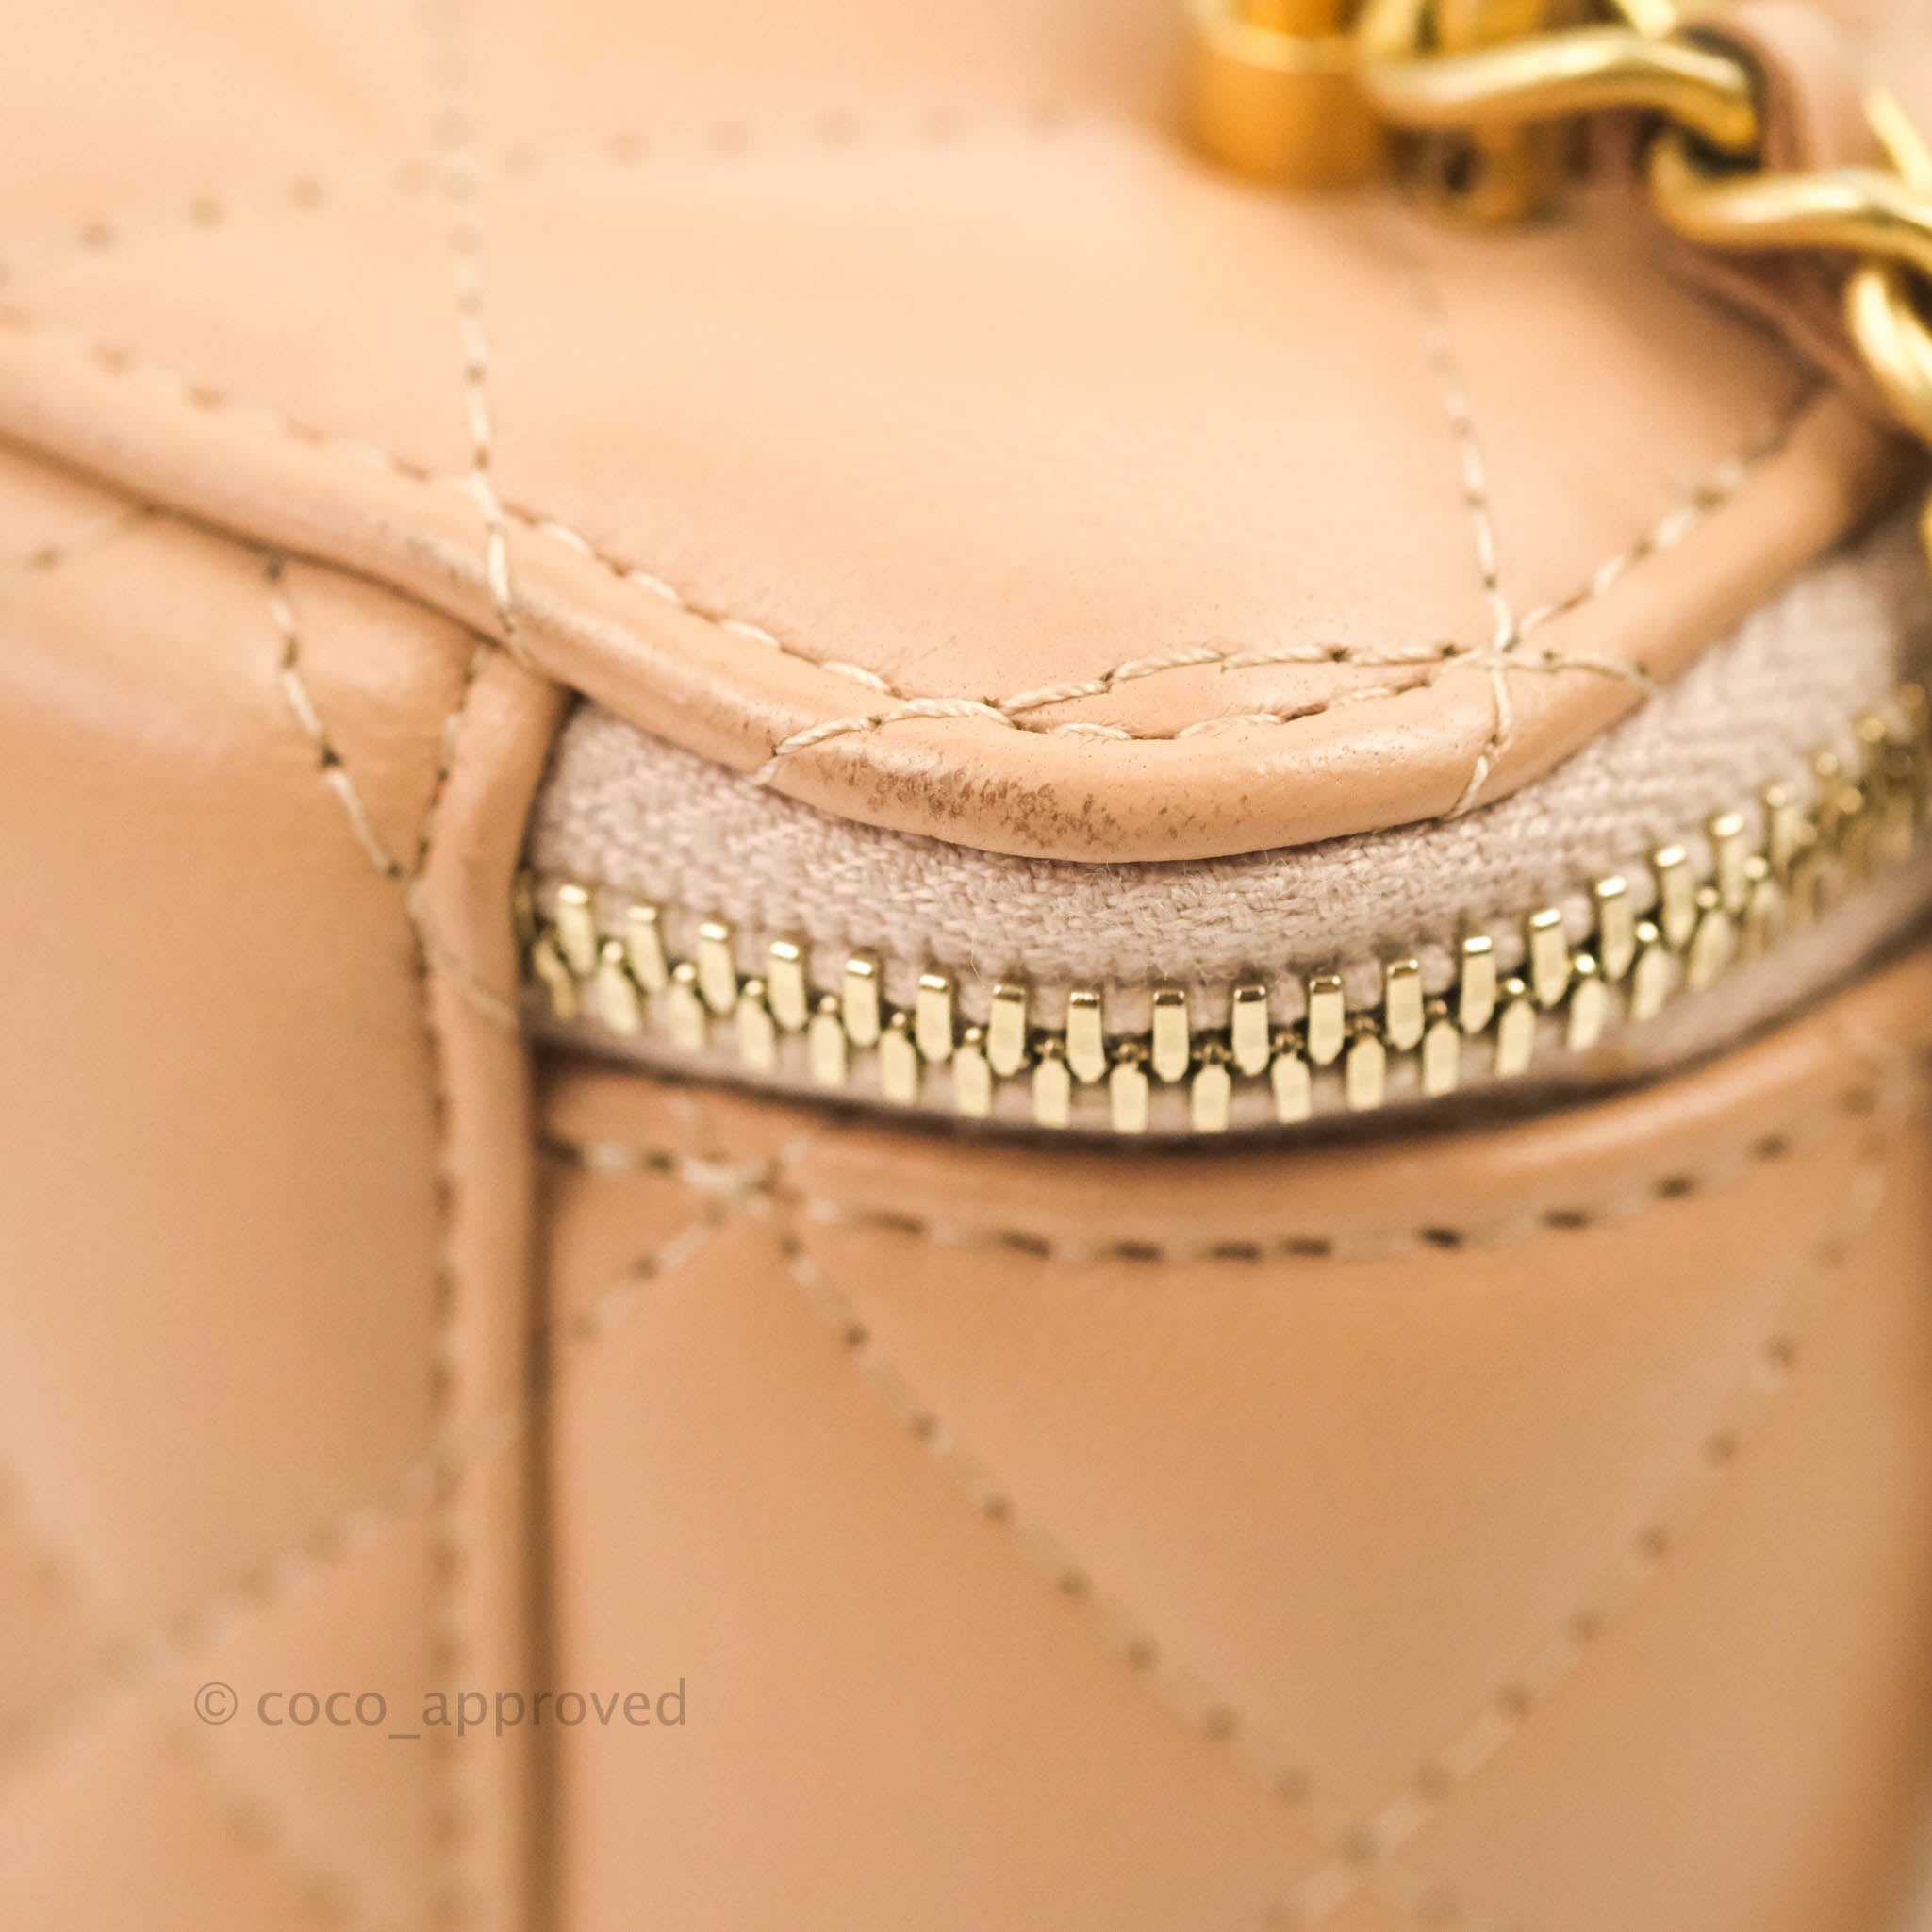 What Fit's Chanel CoCo Handle Bag + How i wrap the Twilly 